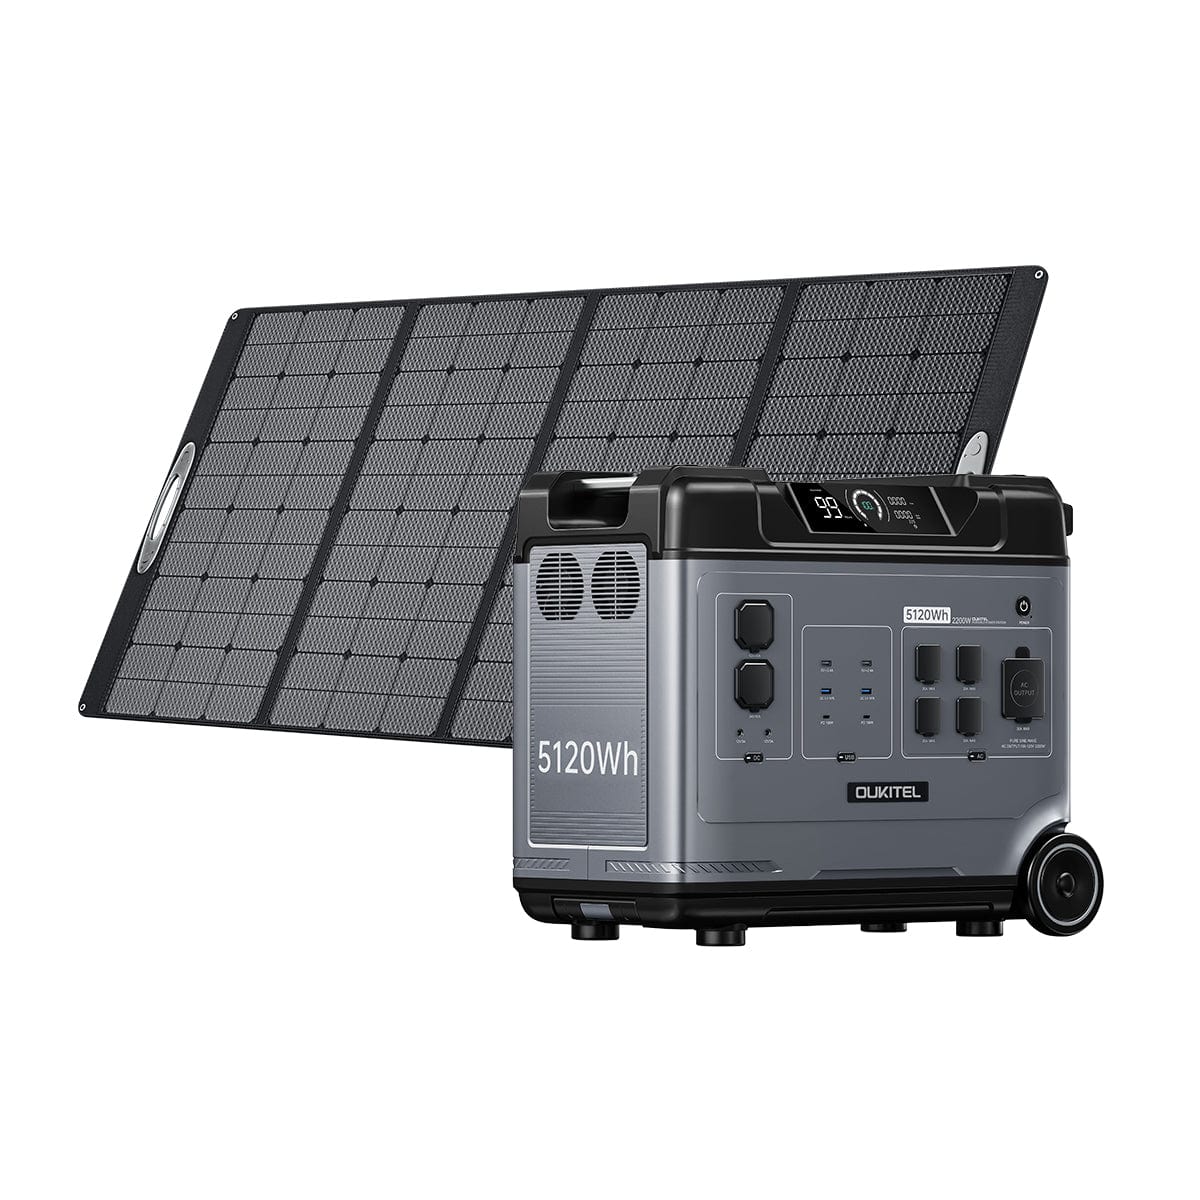 OUKITEL P5000 Solar Generator for Home with 400W Solar Panel Oukitel P5000+400W Portable Solar Panel Protabel Power Station